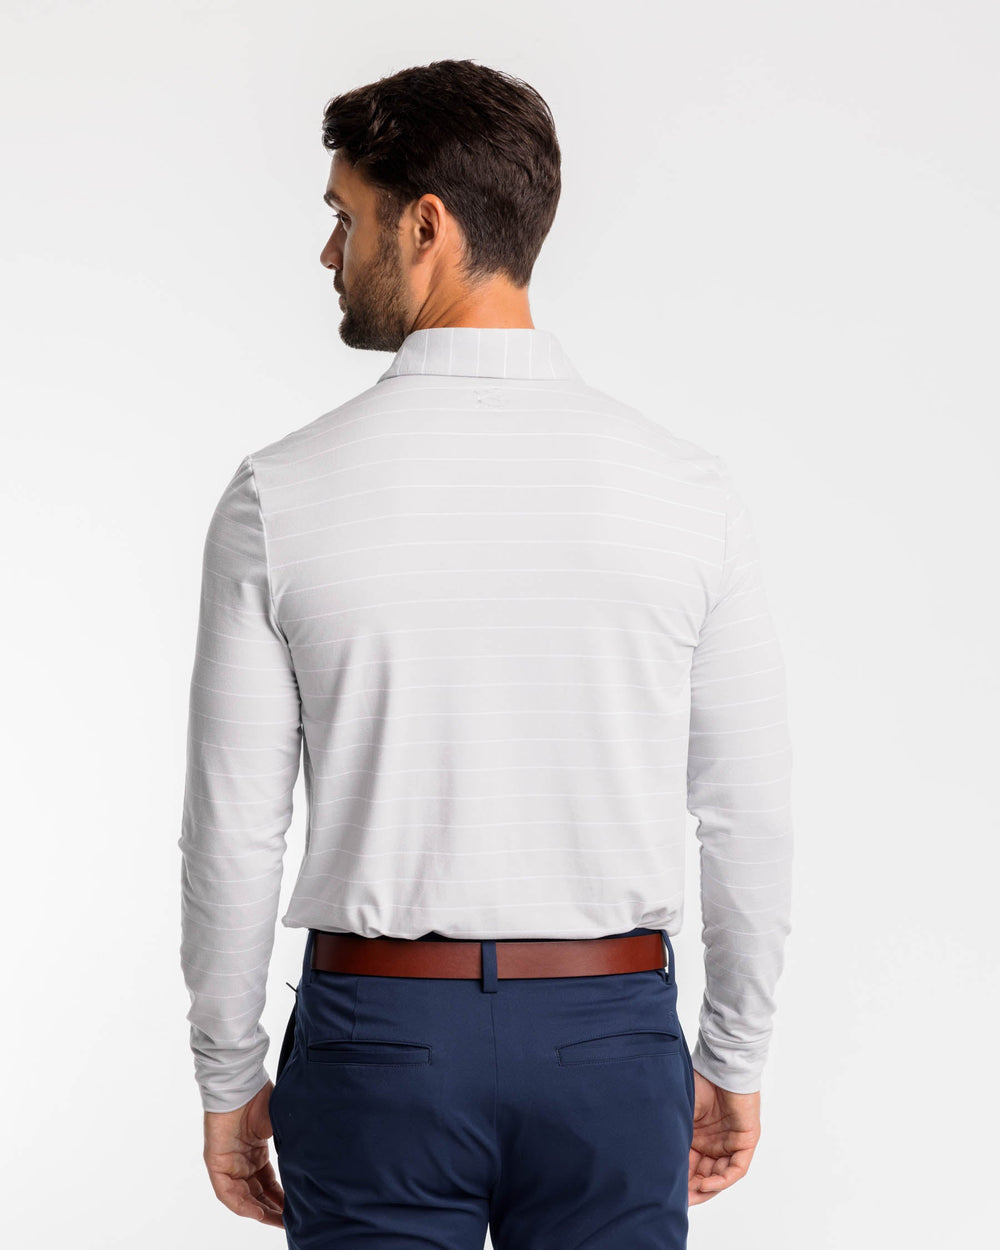 The back tucked view of the Ryder Bartlett Stripe Performance Polo Shirt by Southern Tide - Heather Seagull Grey